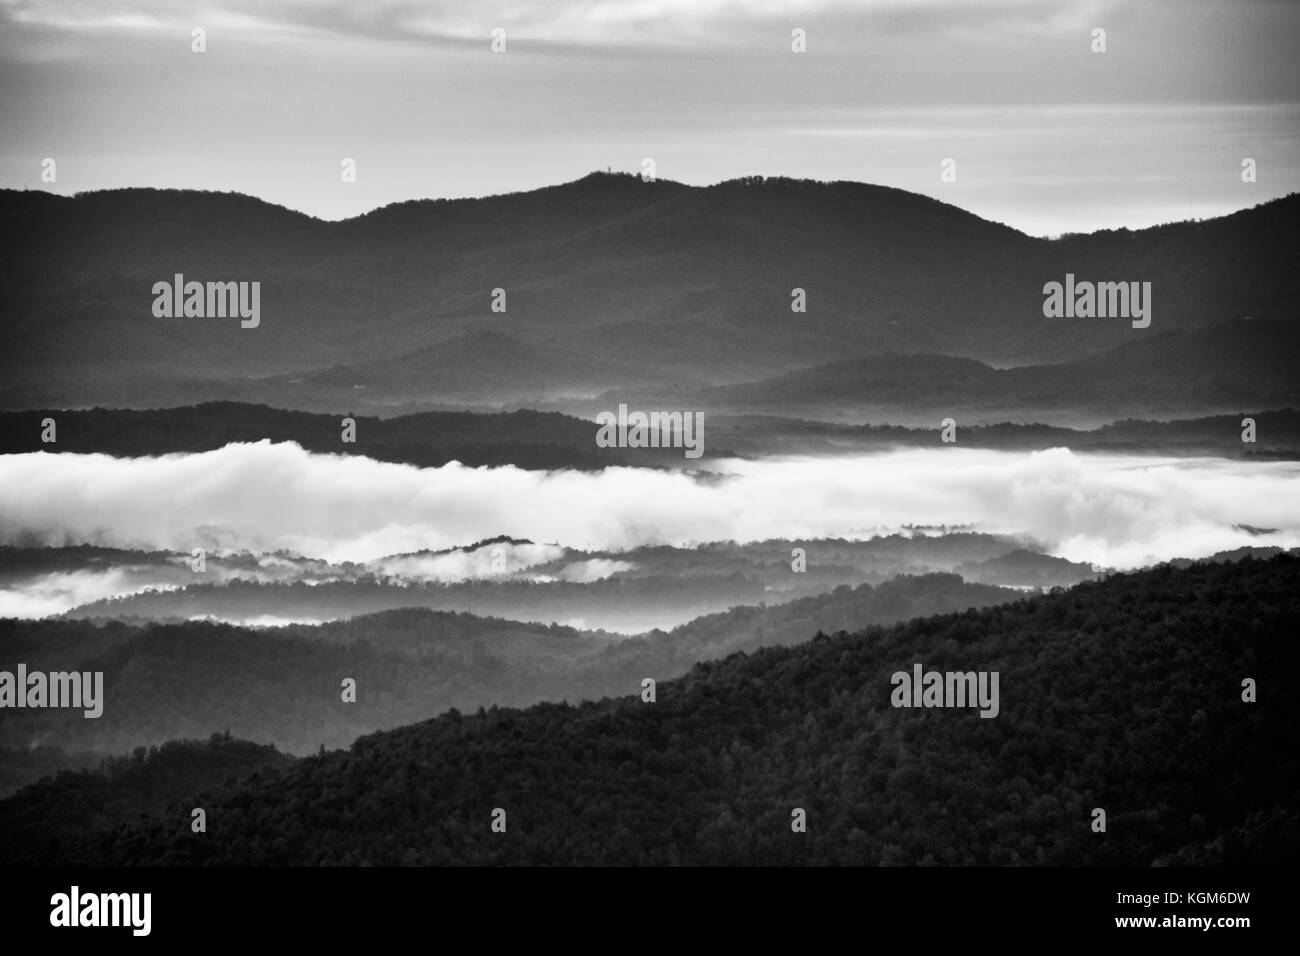 Monochrome view across Blue Ridge mountains at sunrise with fog in the valleys. Stock Photo